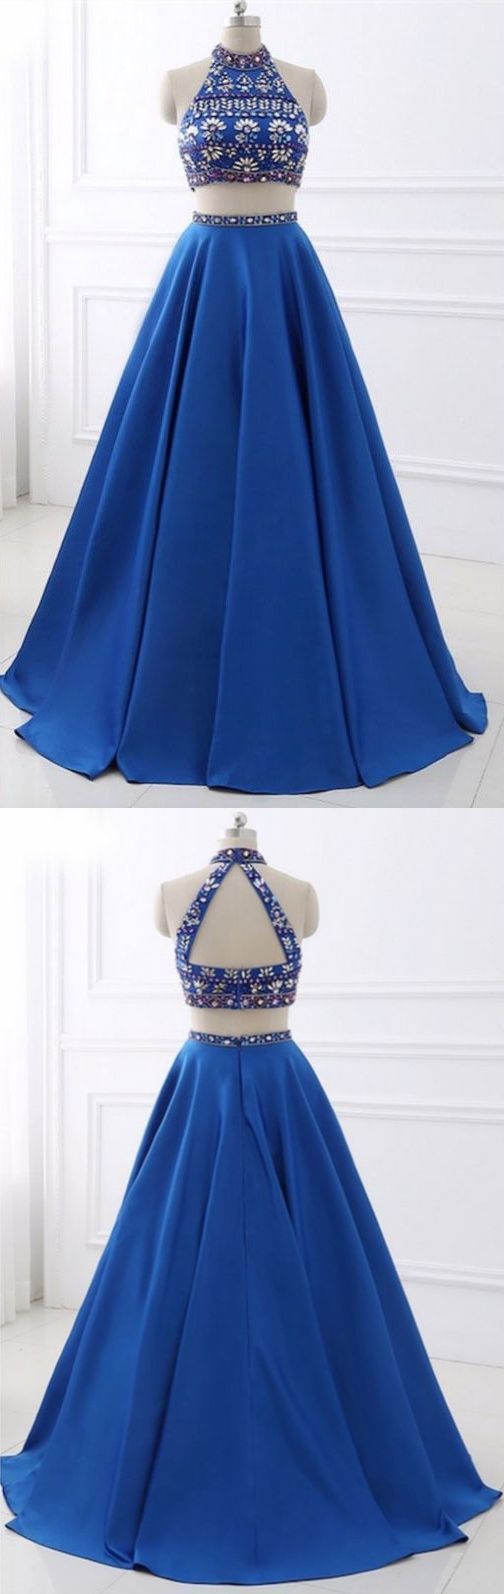 Elegant Two Pieces Royal Blue Satin Long Prom Dress A Line Prom Party Gowns Formal Homecoming Party Dresses